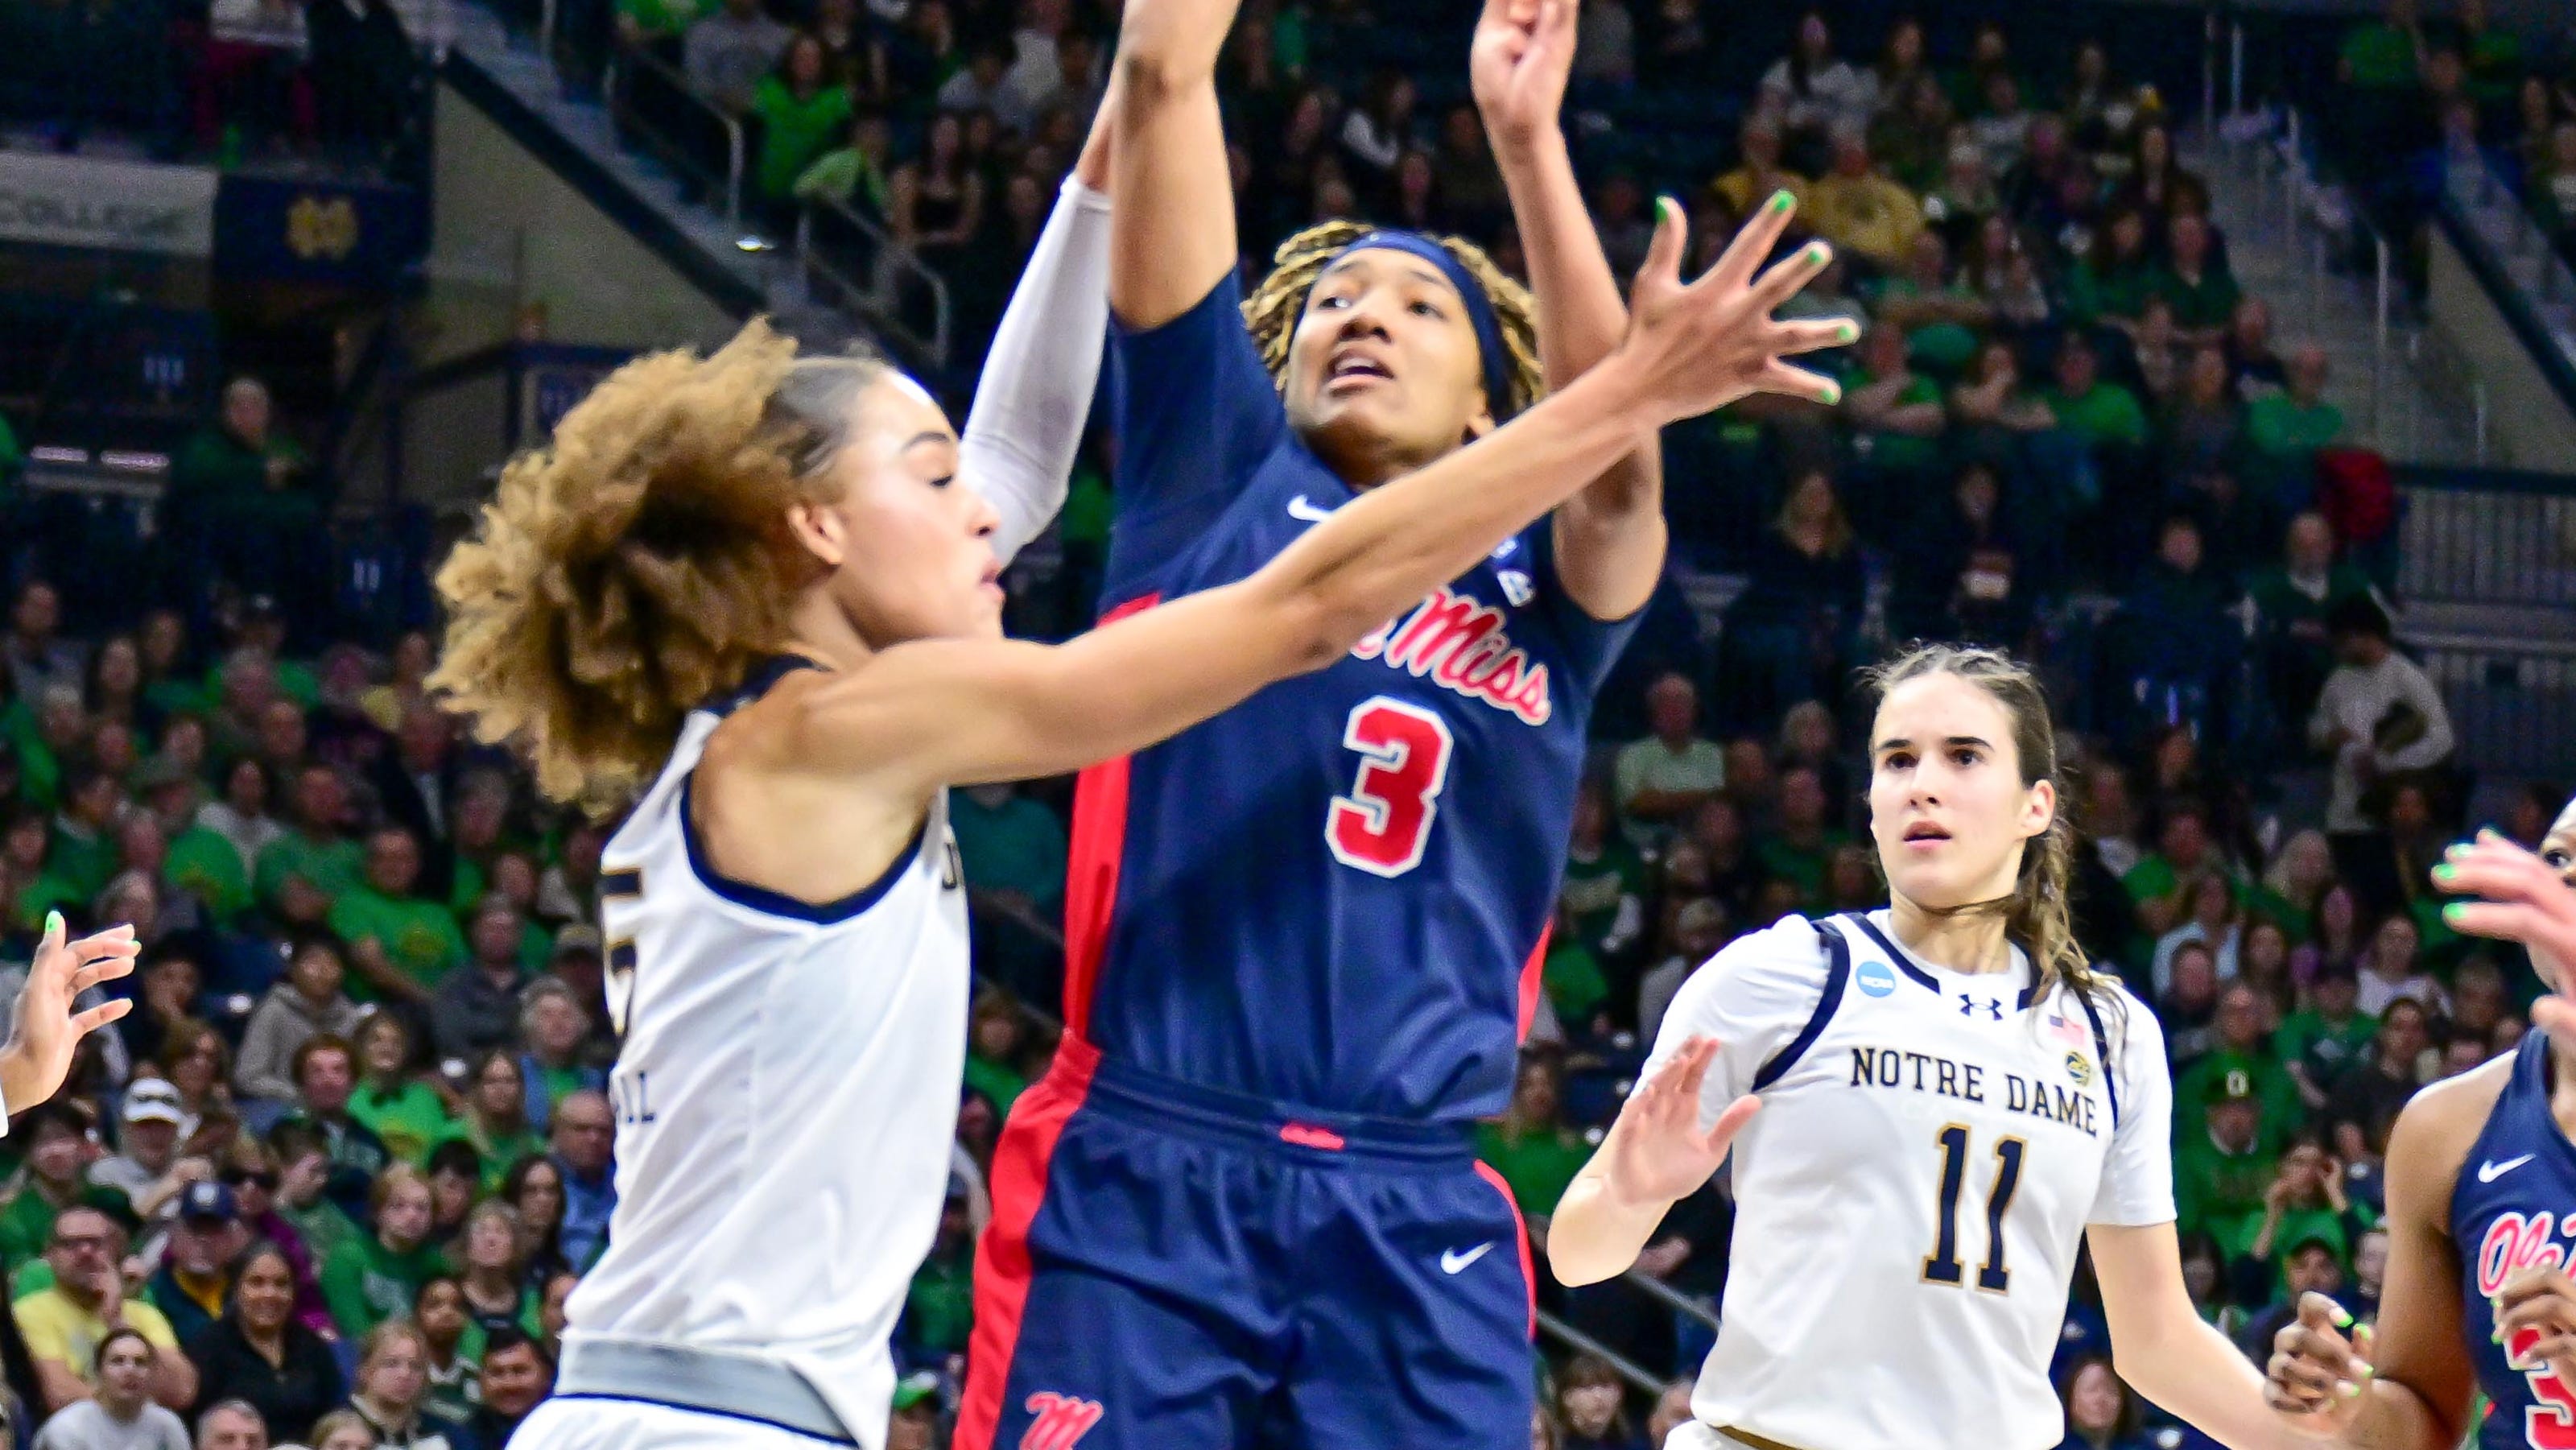  Ole Miss women's basketball vs Notre Dame in NCAA Tournament March Madness: Top photos 